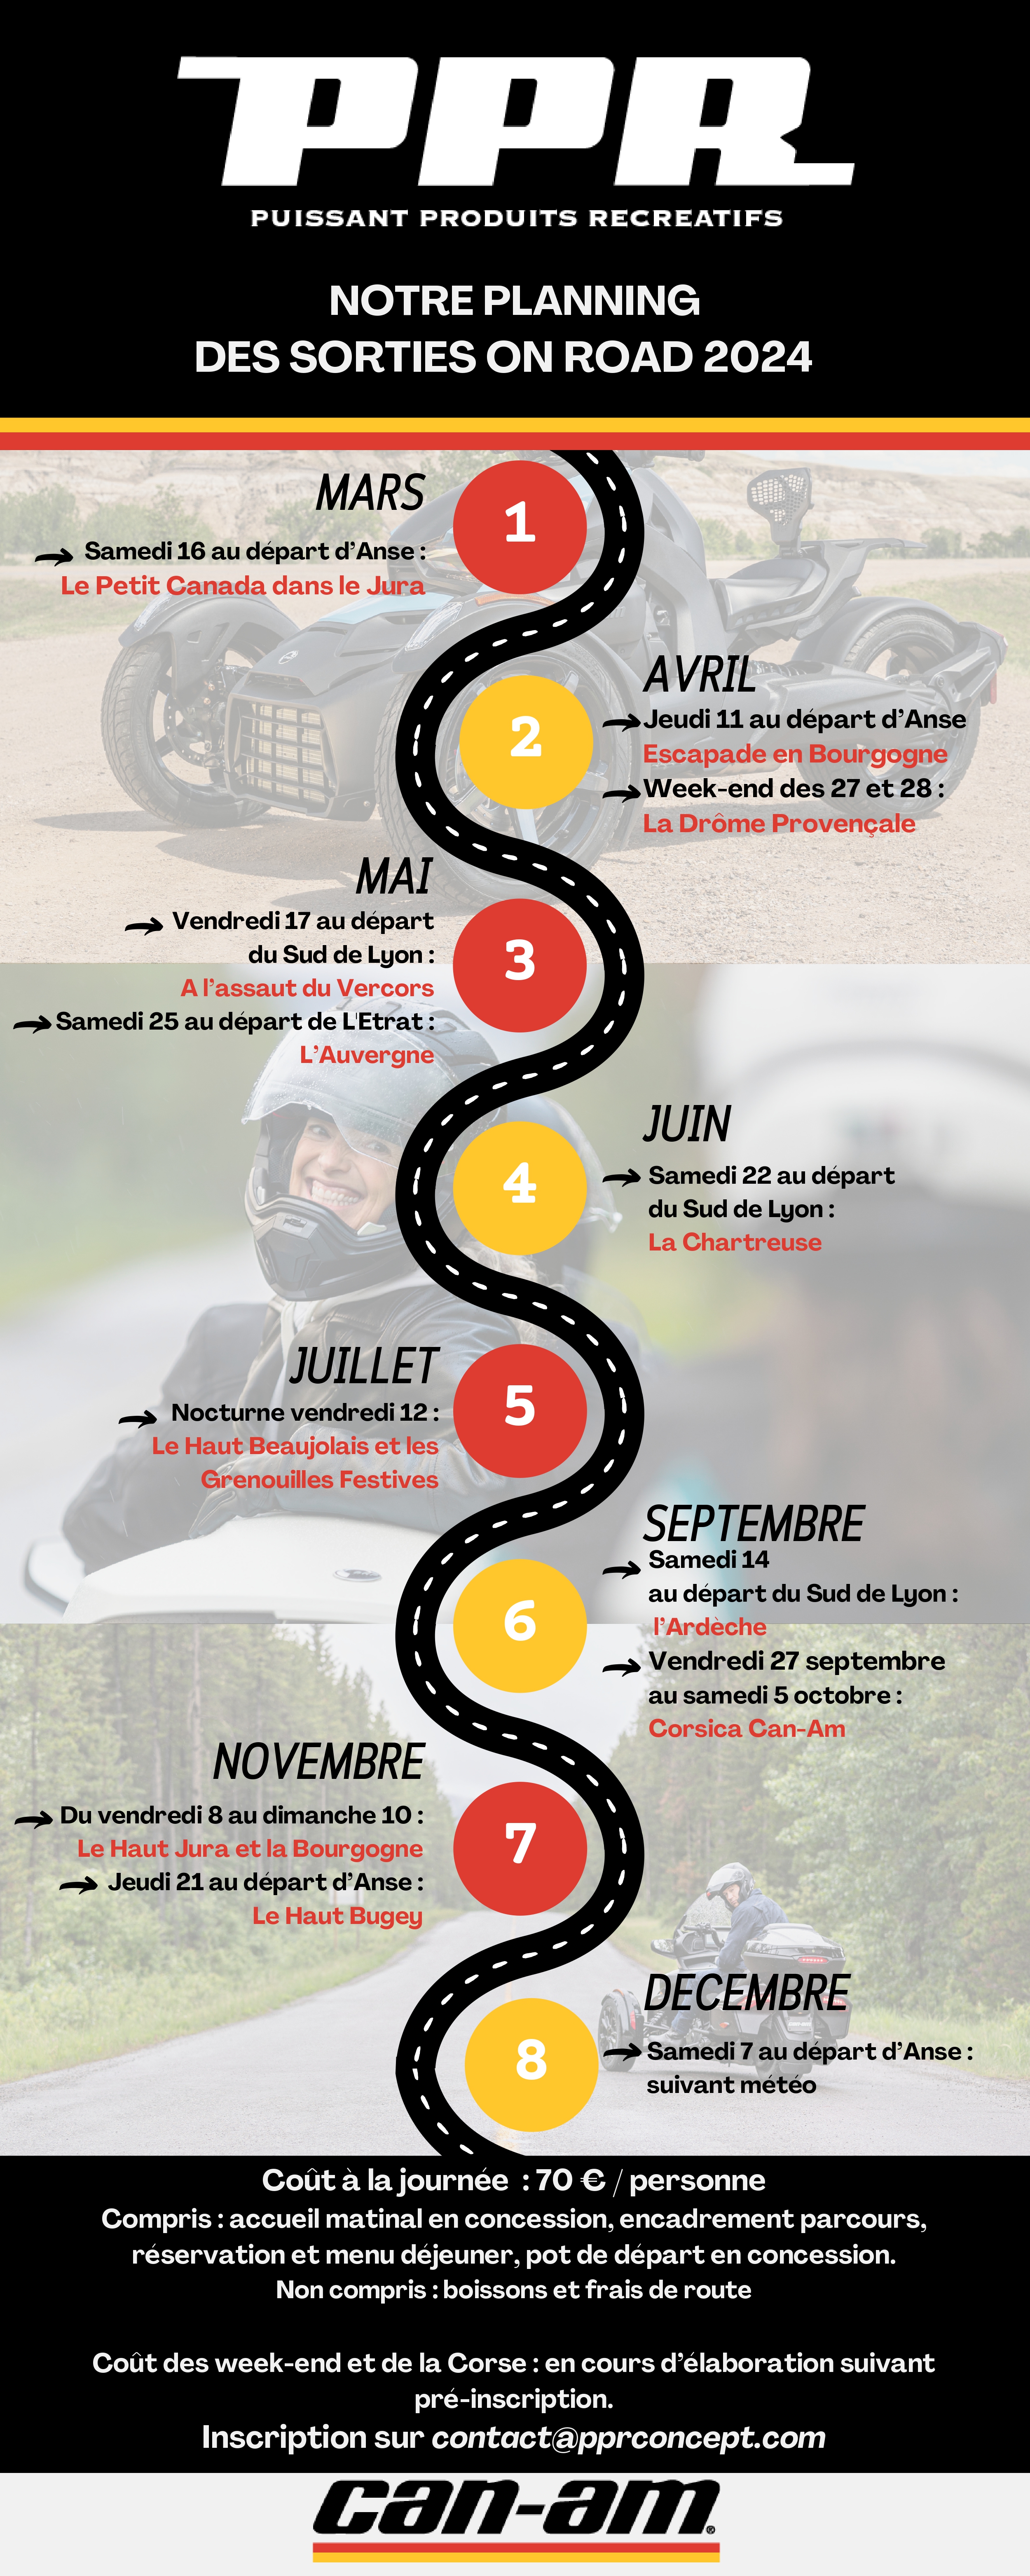 CALENDRIER SORTIES ON ROAD PPR